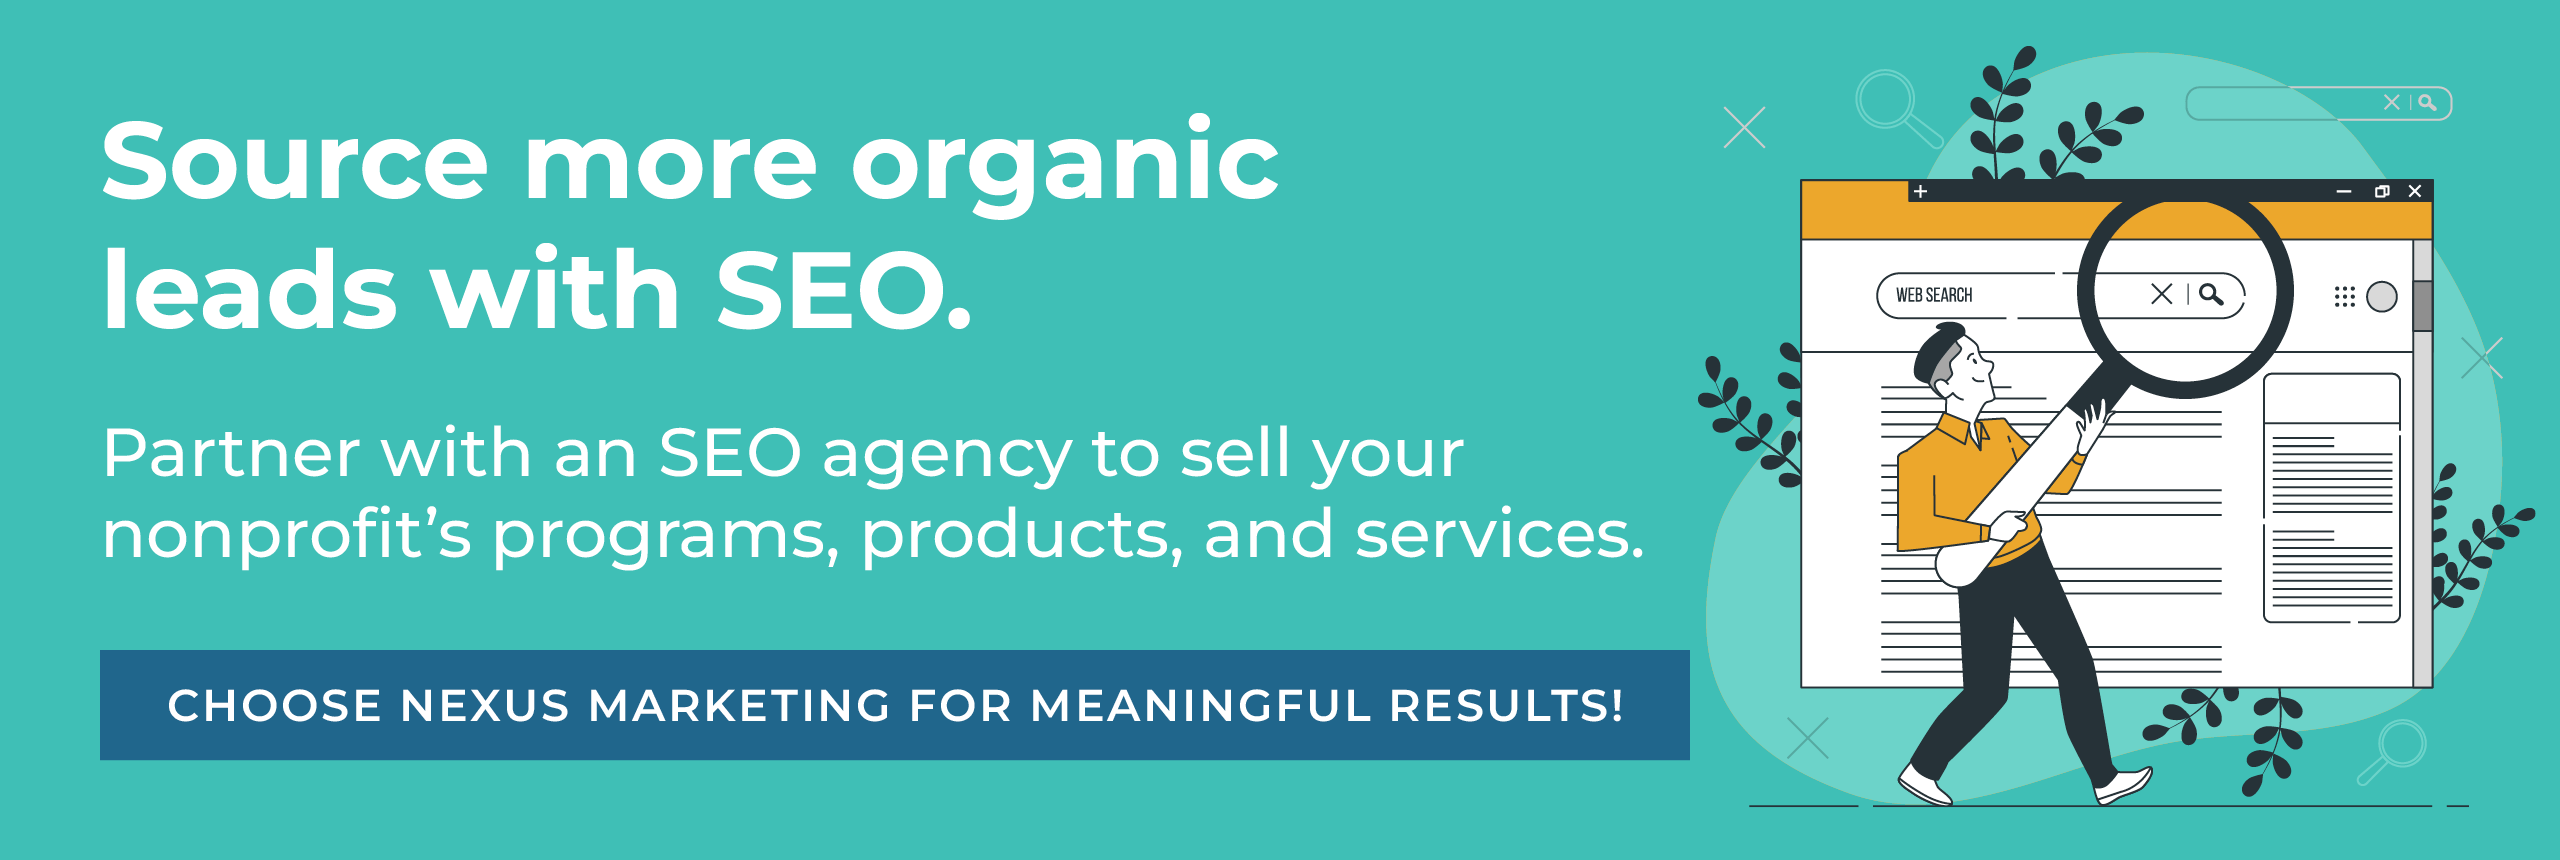 Learn more about our recommended SEO agency, Nexus Marketing, so you can sell more services, products, and programs online.